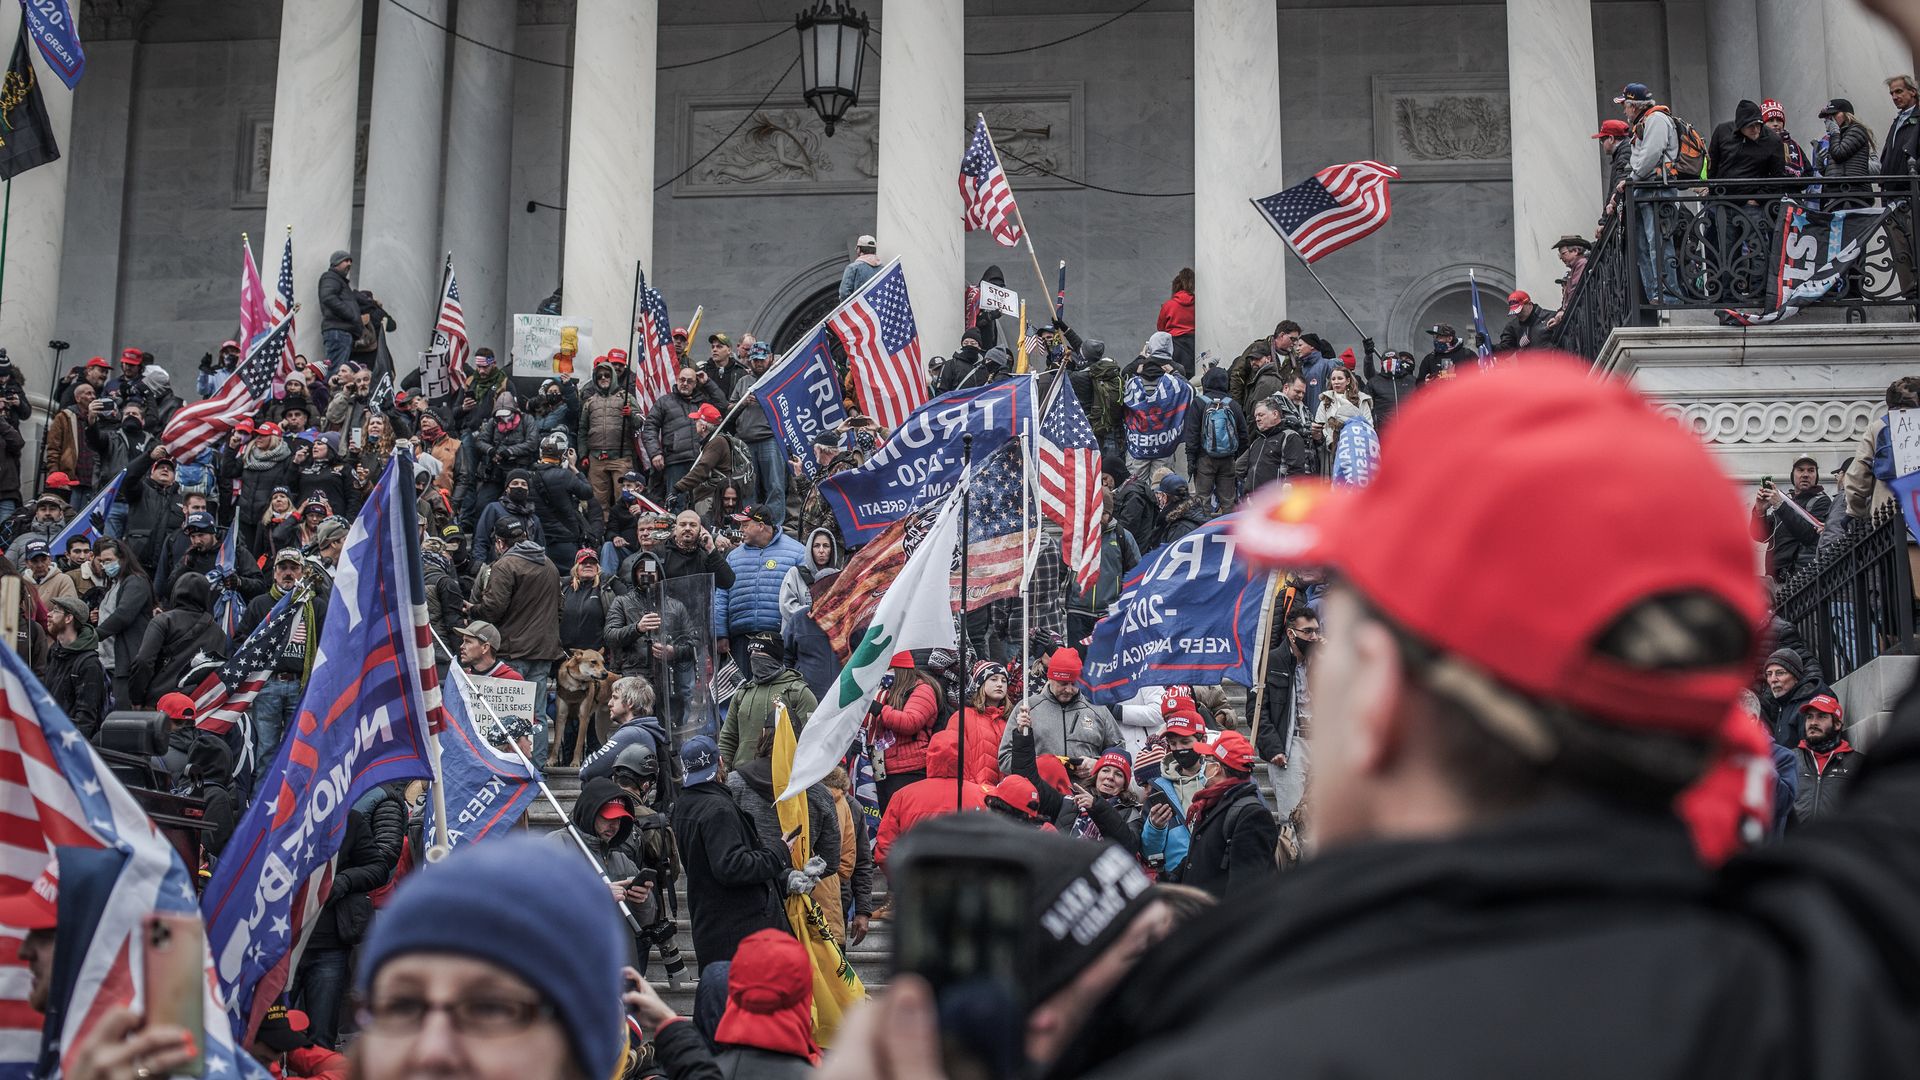 Photo of Trump supporters holding various signage and American flags crowded onto the steps of the U.S. Capitol